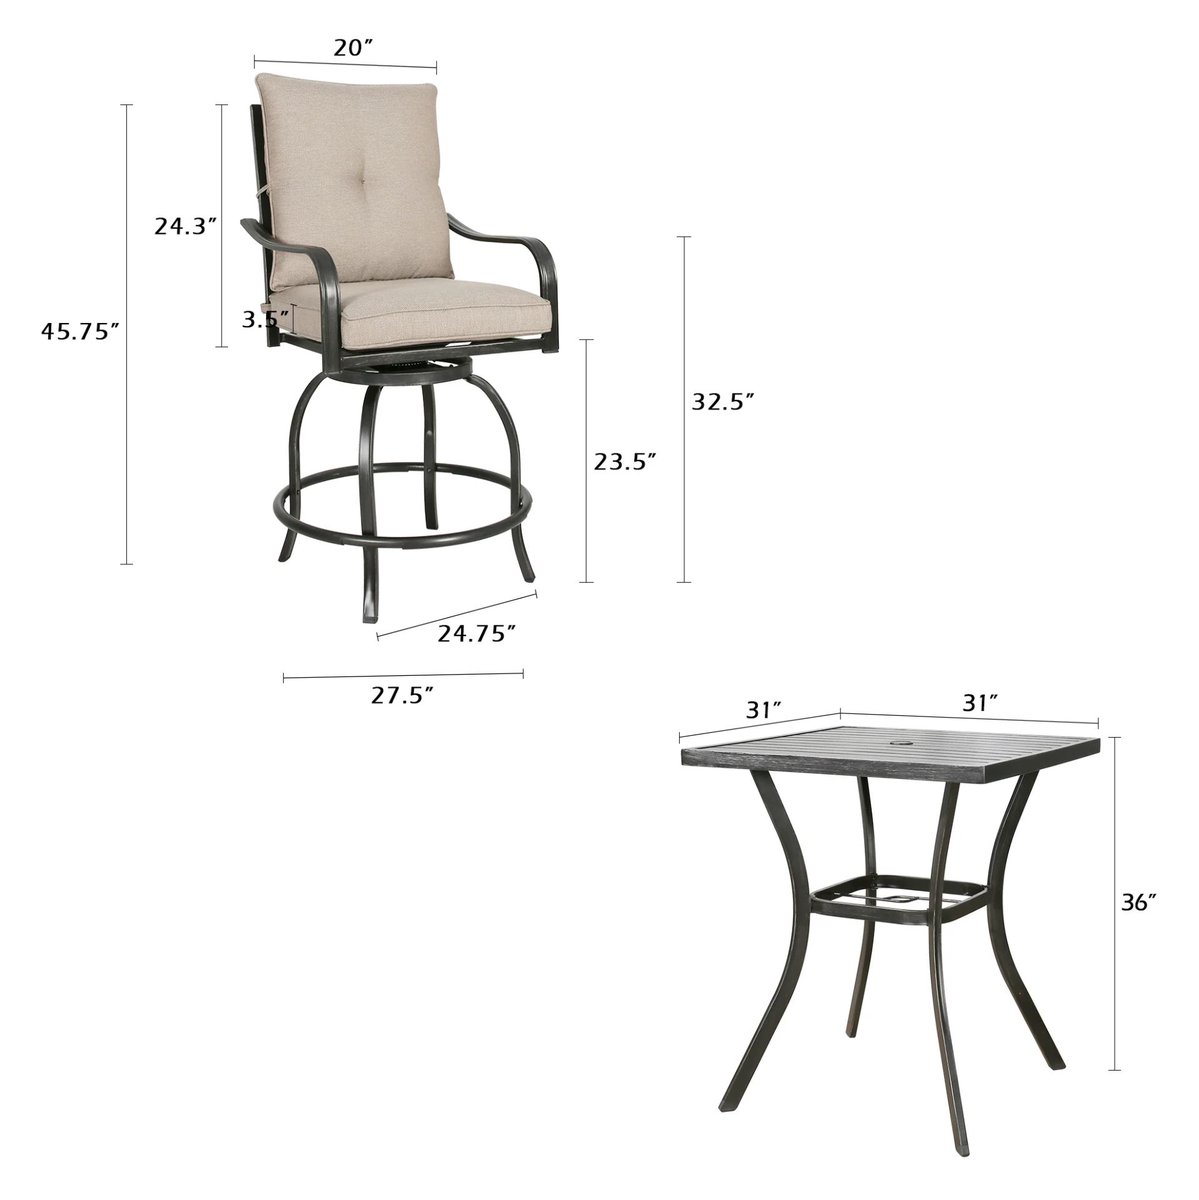 Patio 5 Pieces Metal Bar Height Dining Set with Square Bar Table and Swivel Counter Stools with Cushions (Beige)
peakhomefurnishings.com
#chair #patio #patiodecor #furniture #interiordesign #family #hangout #DiningSet #DiningChair #squareTable #swivelchair #barstools #heightchair